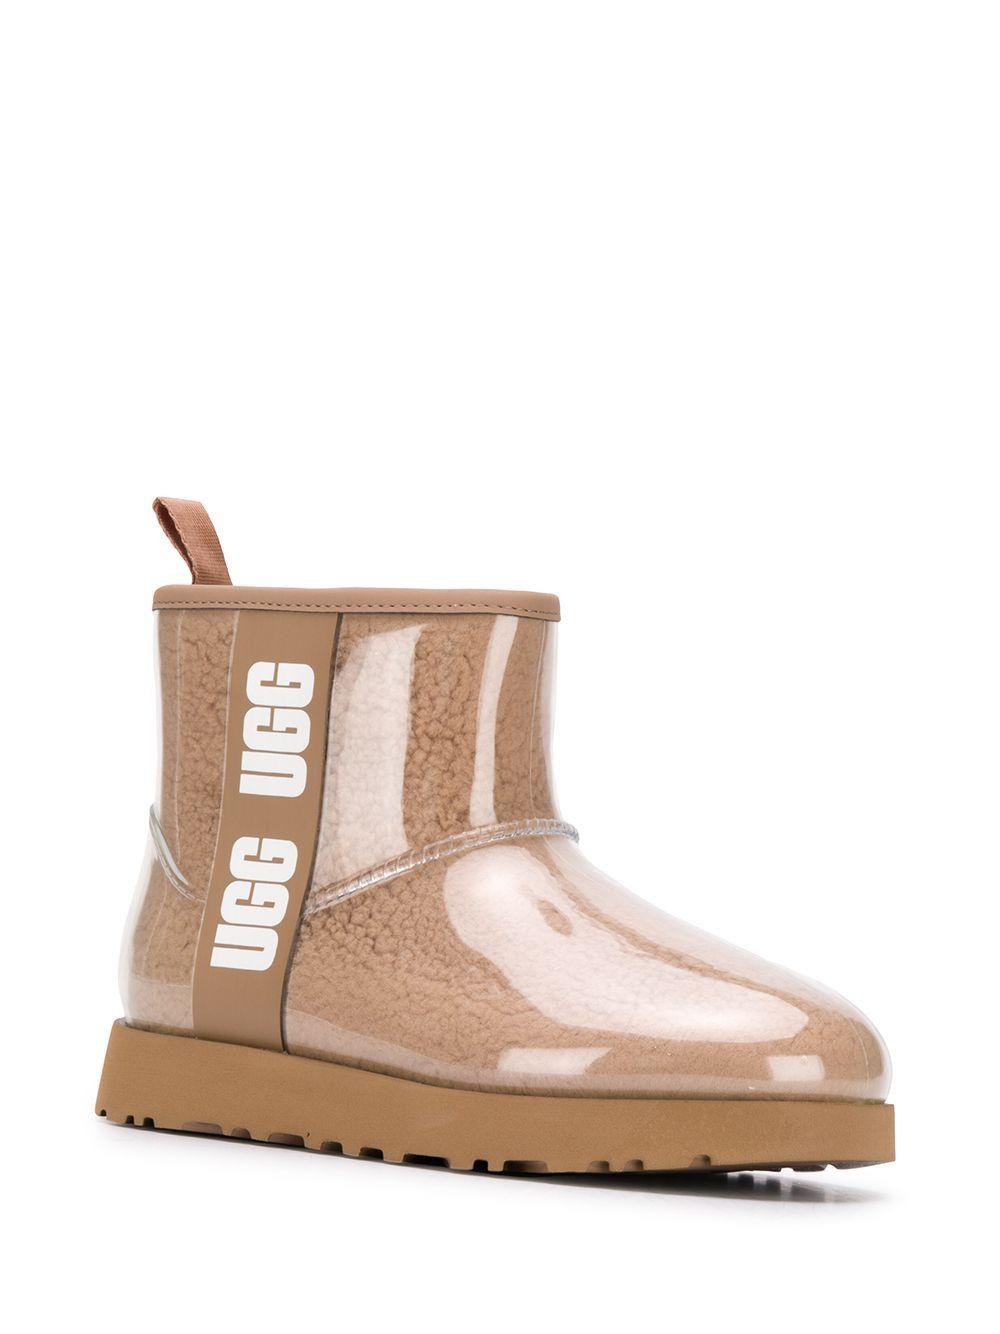 UGG Mini Classic Clear Boots in Beige (Natural) - Lyst